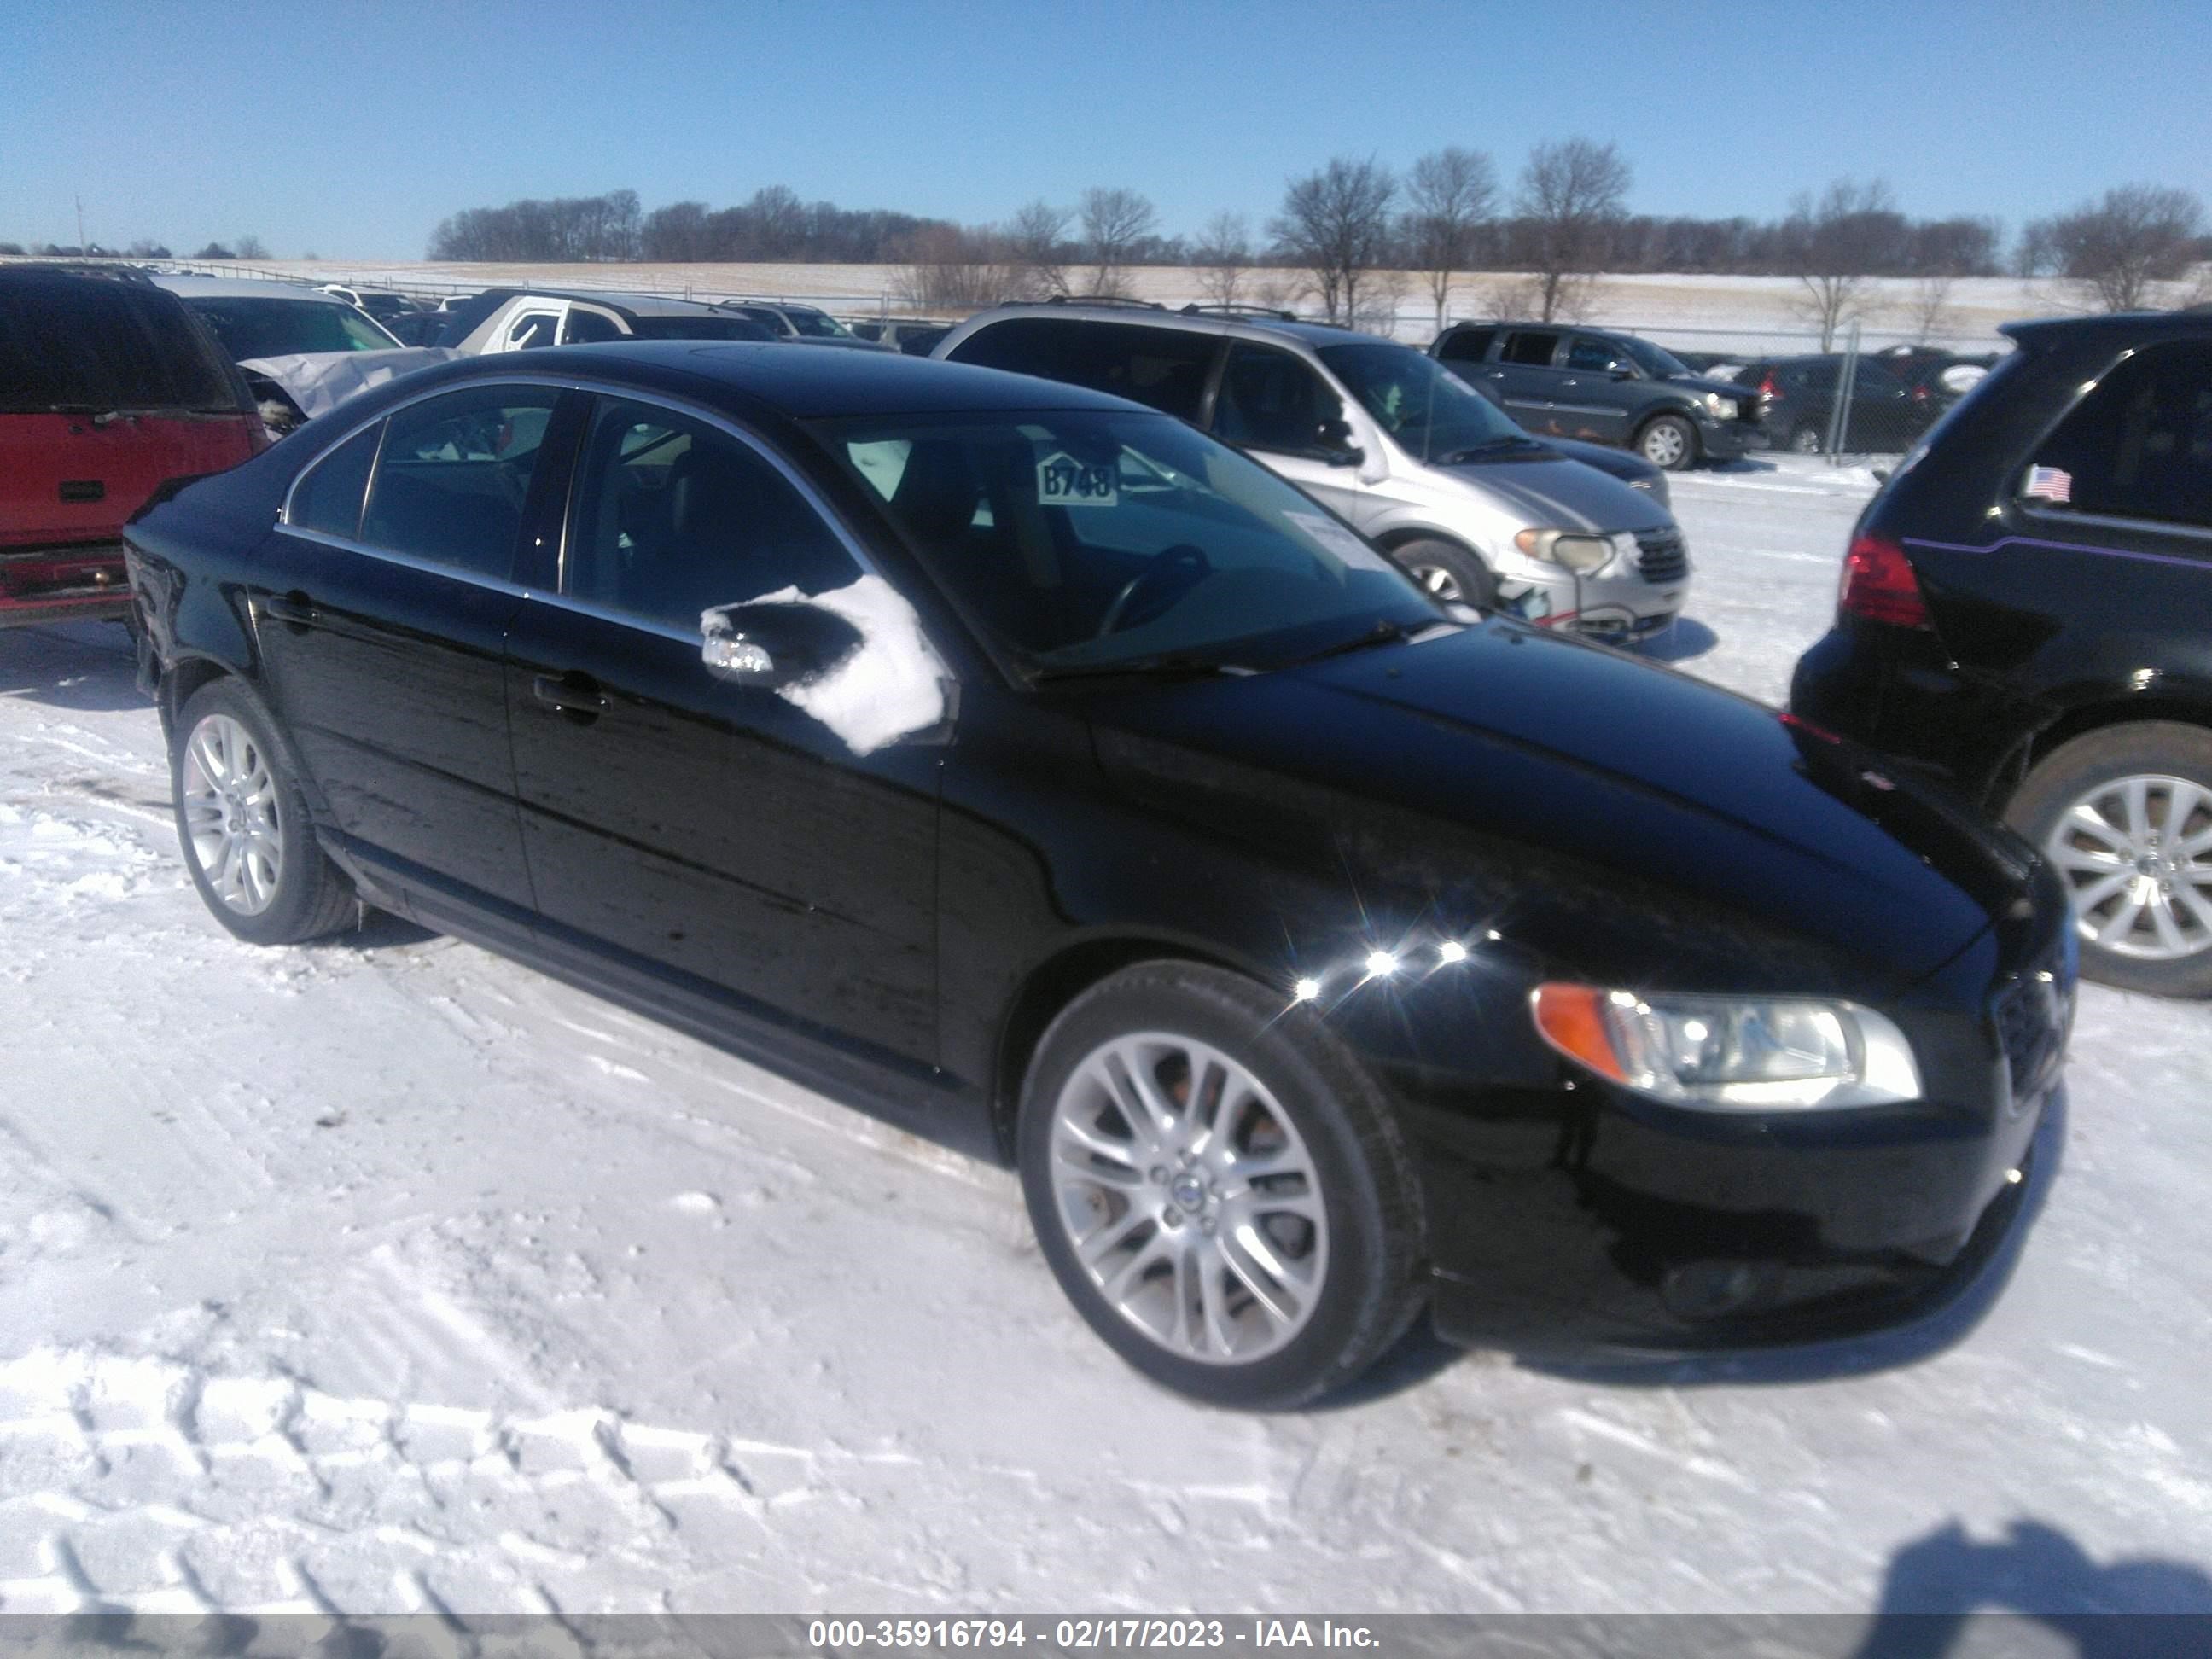 vin: YV1AS982X71020828 YV1AS982X71020828 2007 volvo s80 3200 for Sale in 50069, 1000 Armstrong Dr, De Soto, Iowa, USA